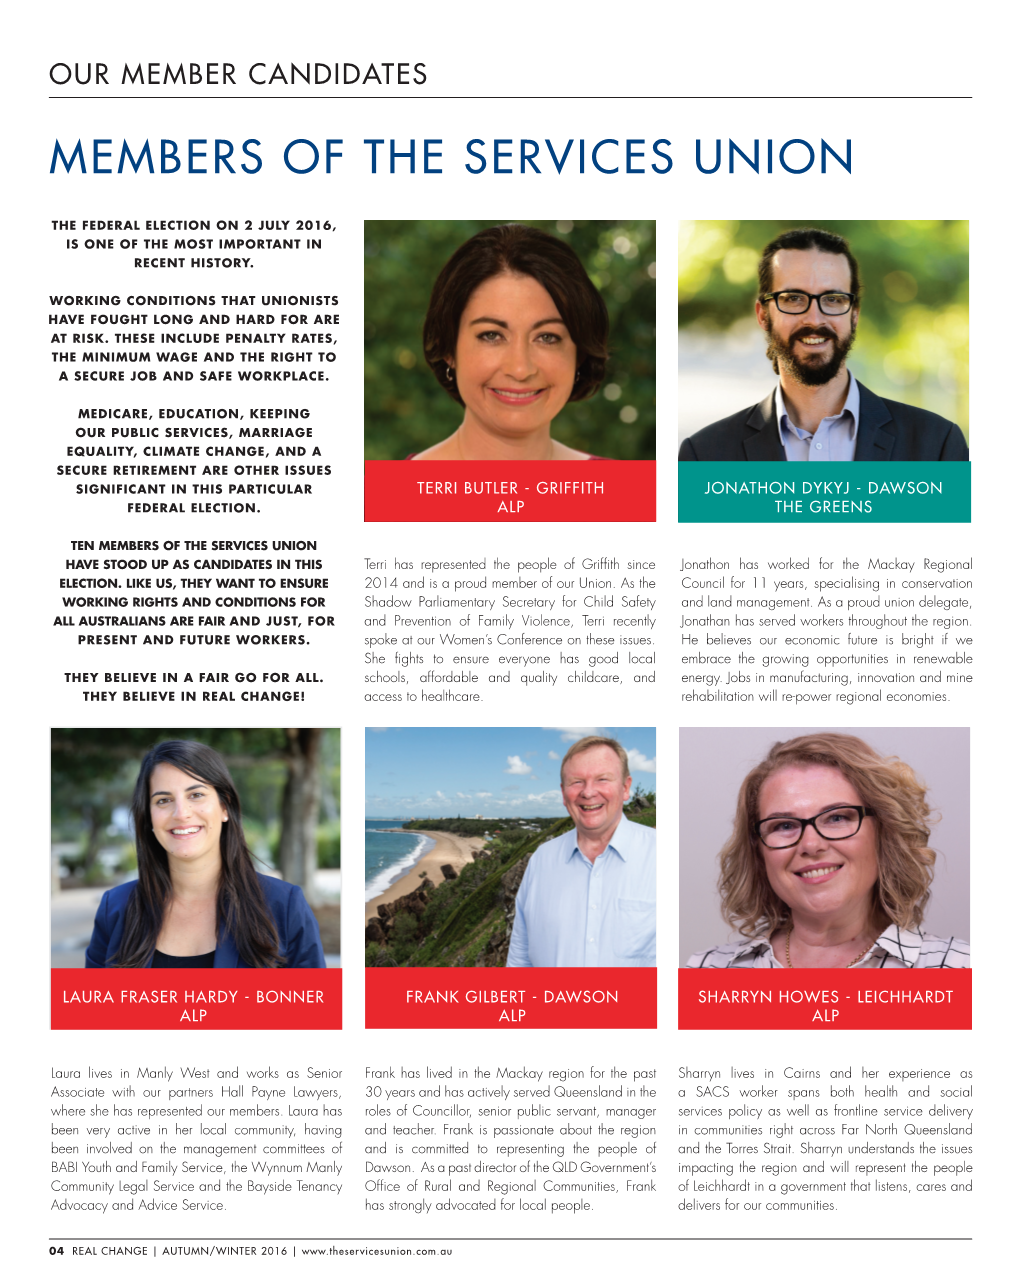 Members of the Services Union